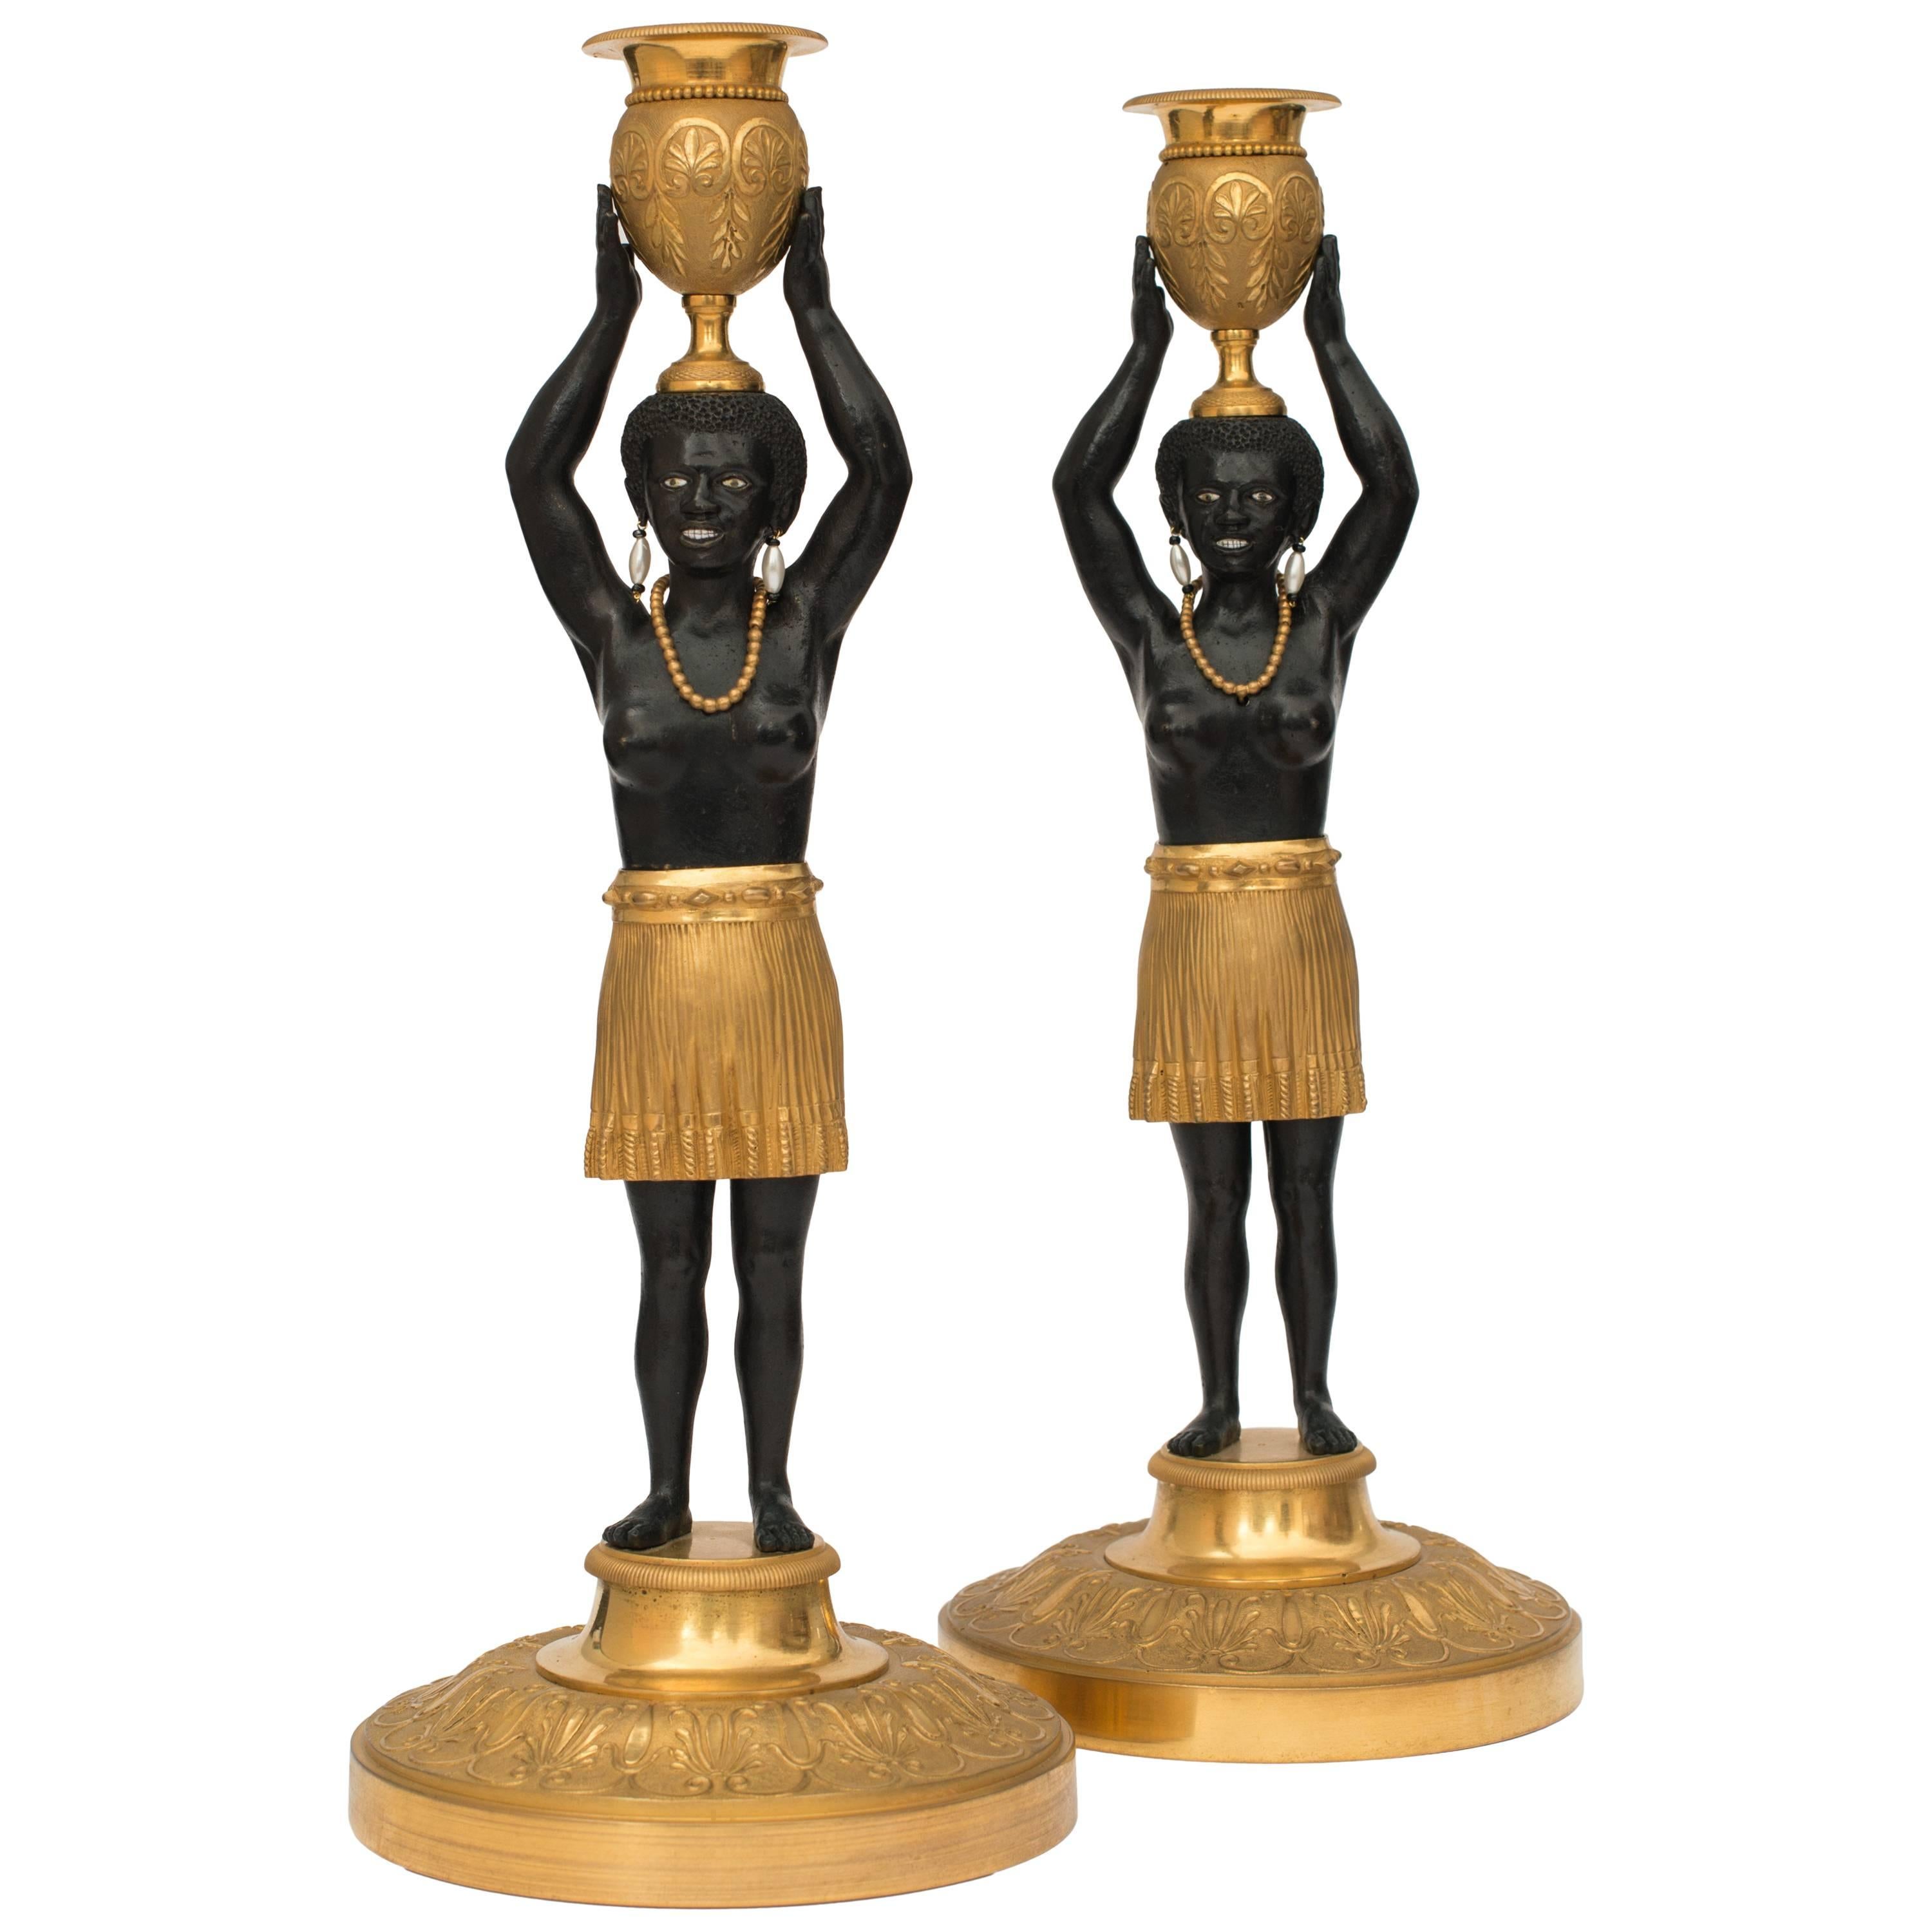 Antique Gilt Bronze Candlesticks France 1800 Attributed to Jean Simon Deverberie For Sale